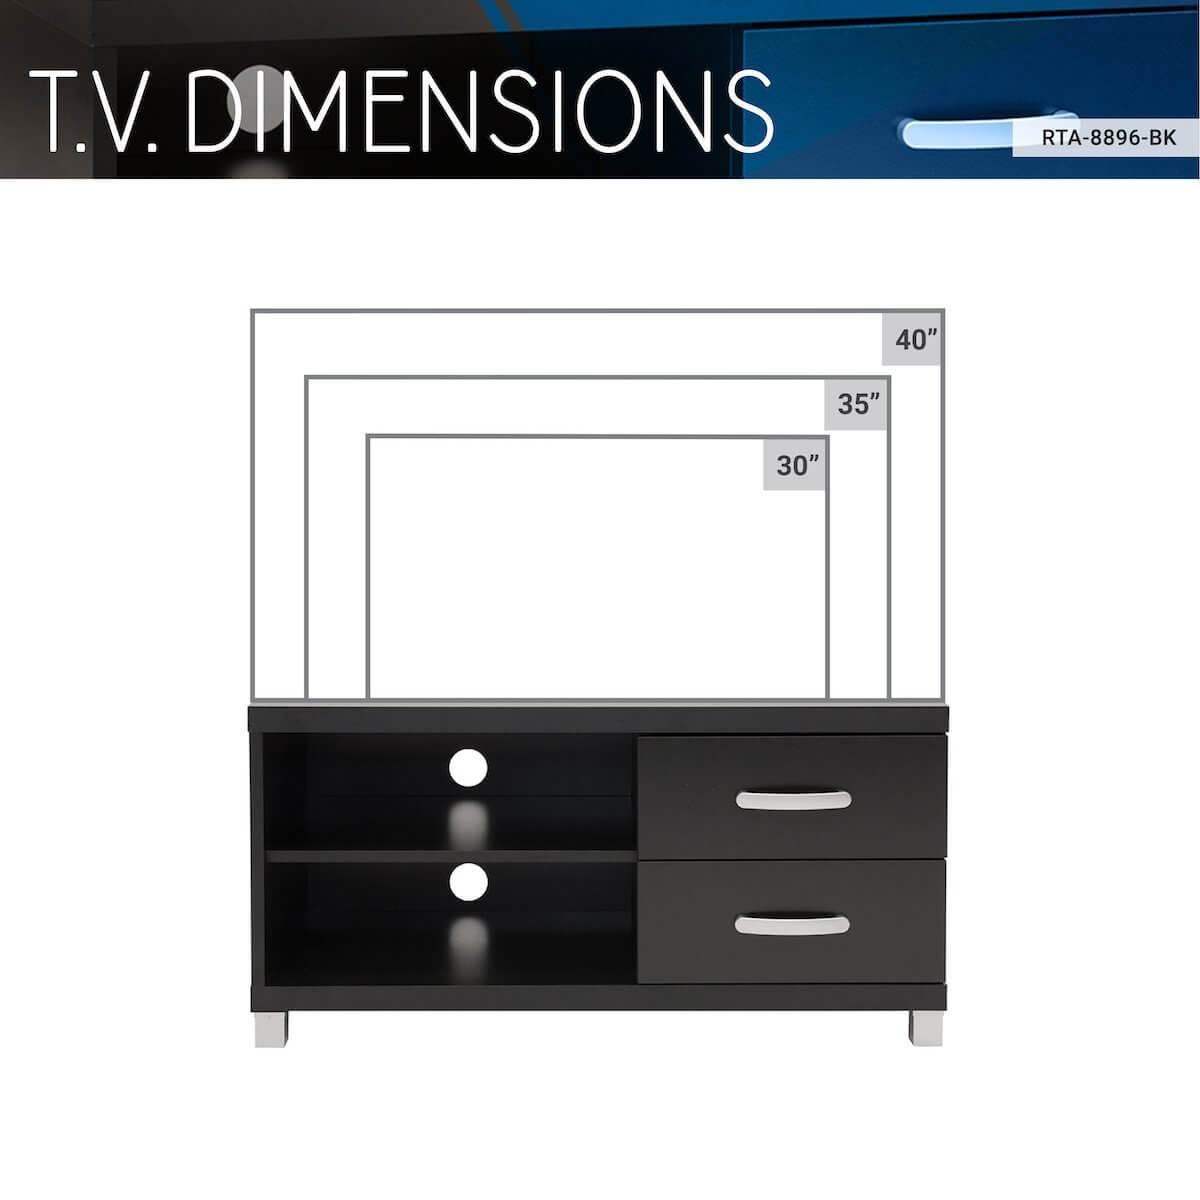 Techni Mobili Black Modern TV Stand with Storage for TVs Up To 40" RTA-8896-BK TV Dimensions